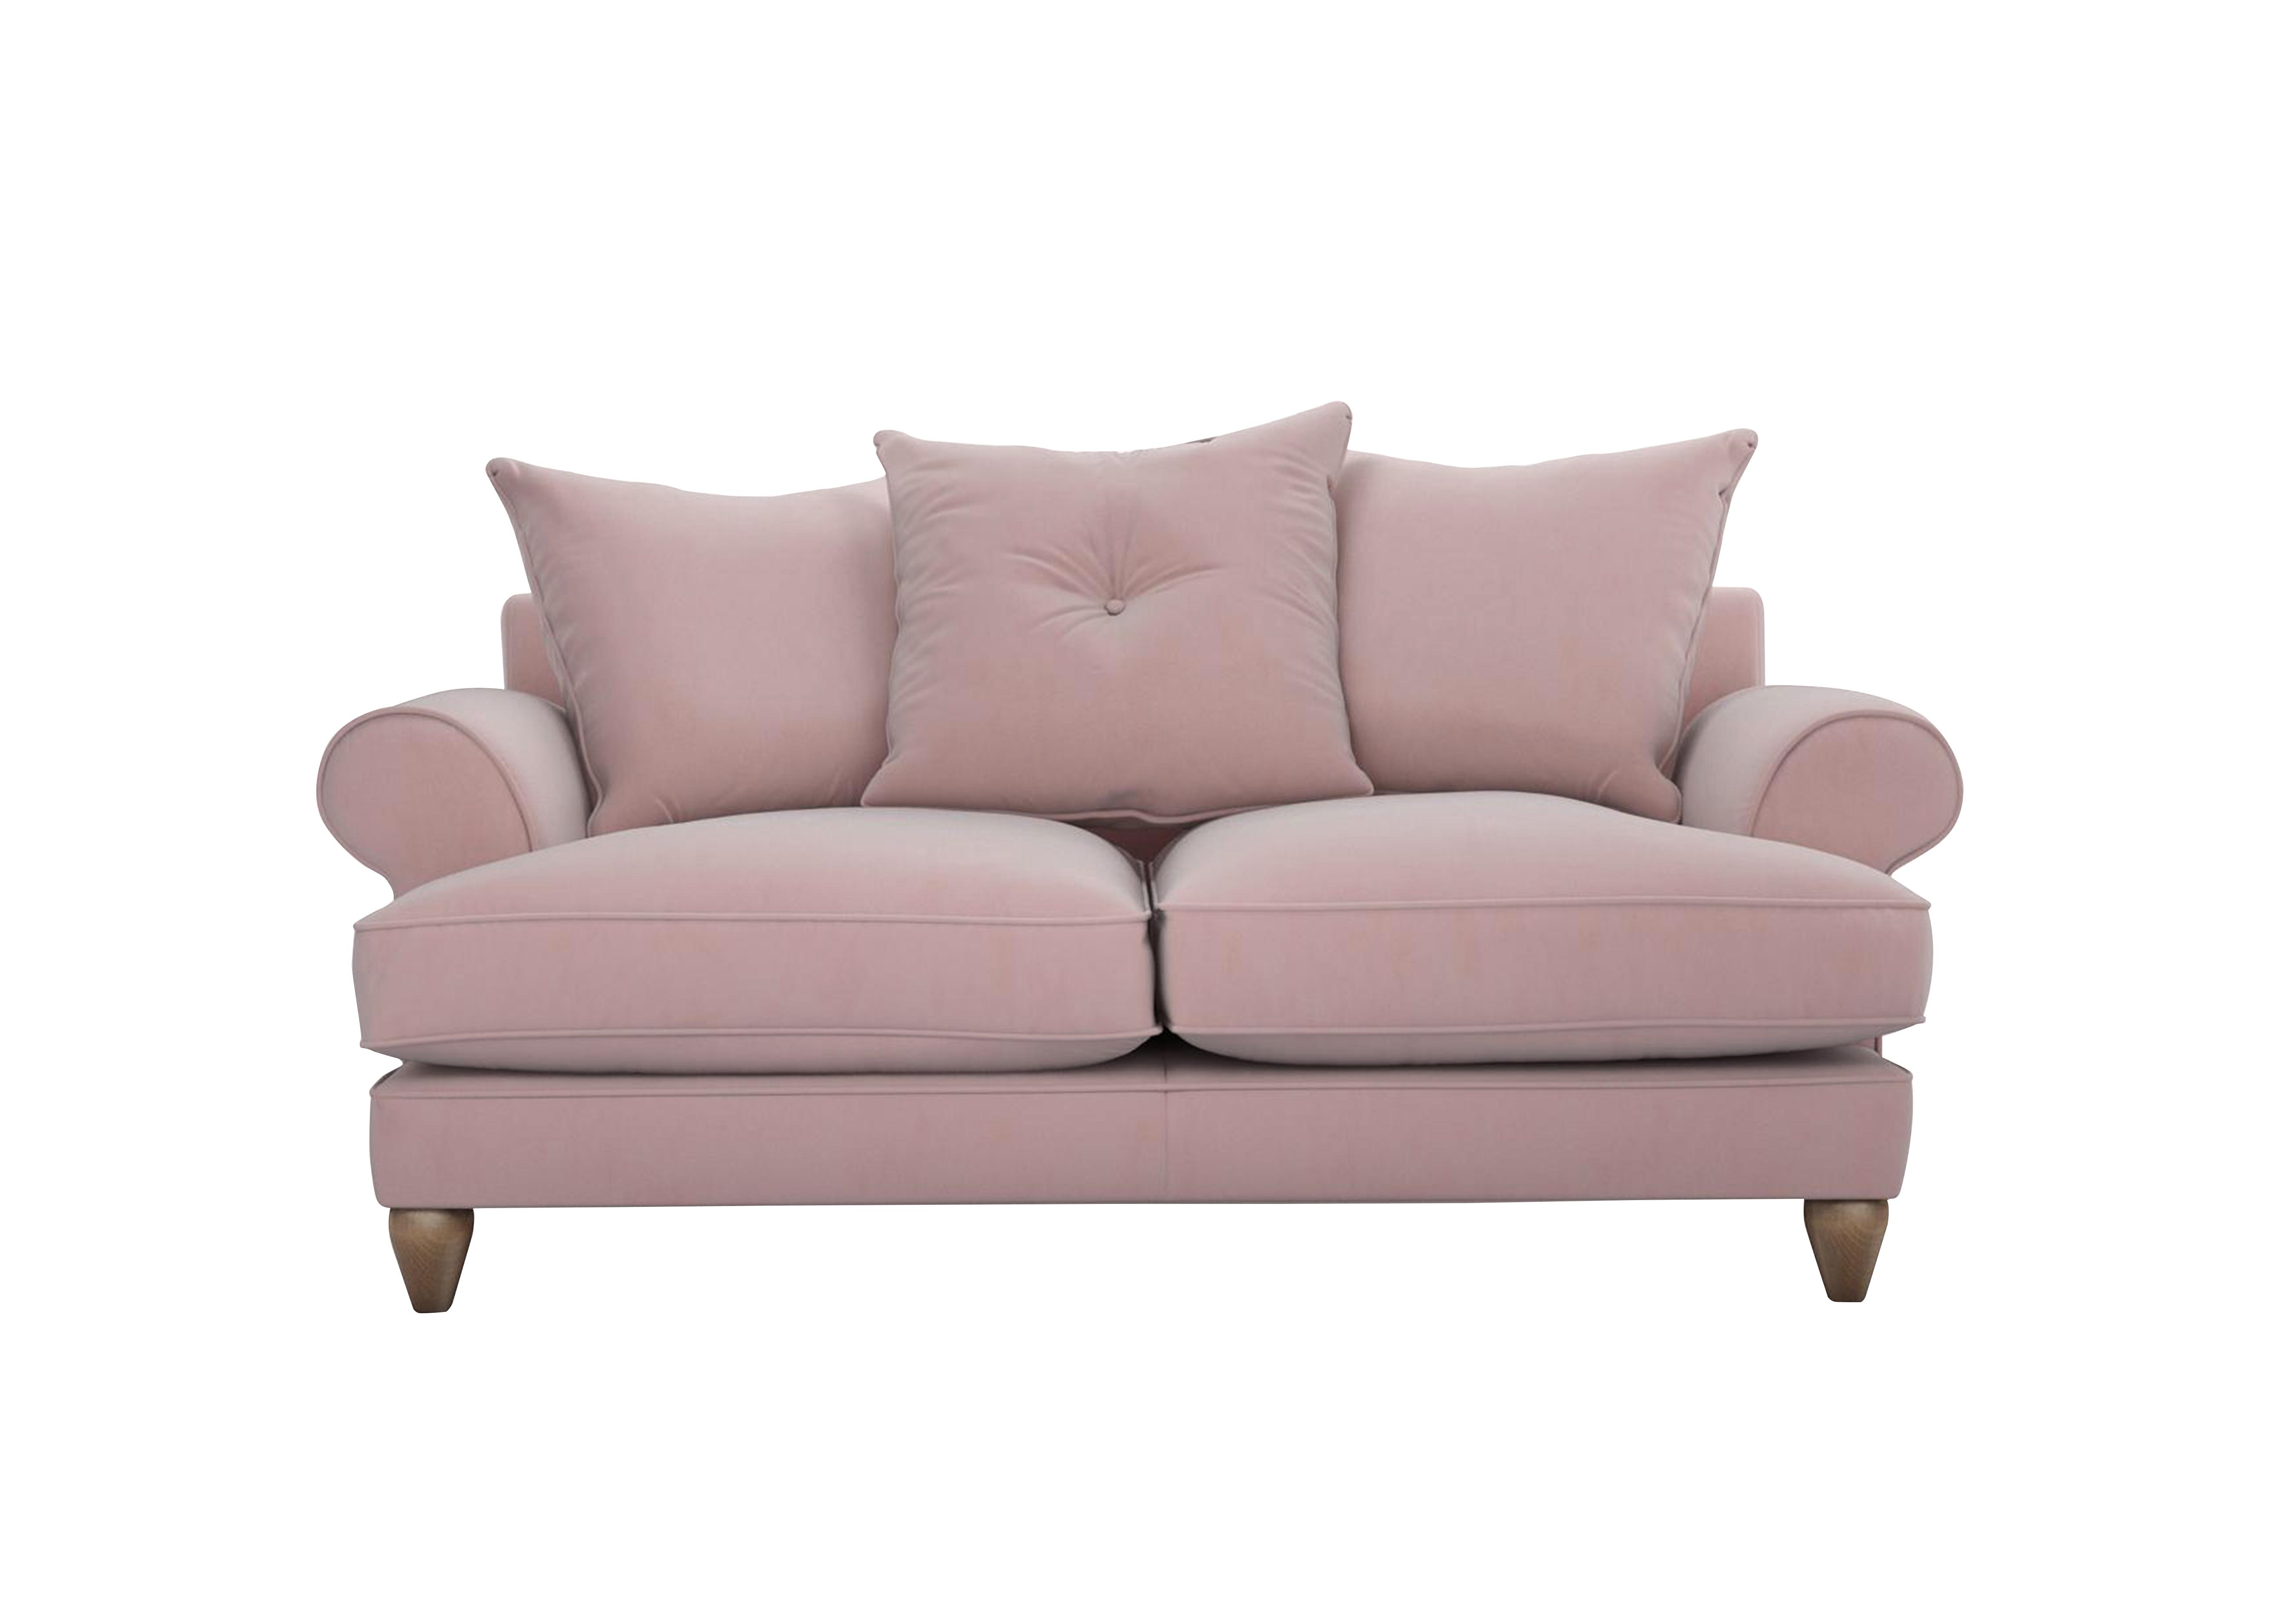 Bronwyn 2.5 Seater Fabric Scatter Back Sofa in Cot256 Cotton Candy on Furniture Village